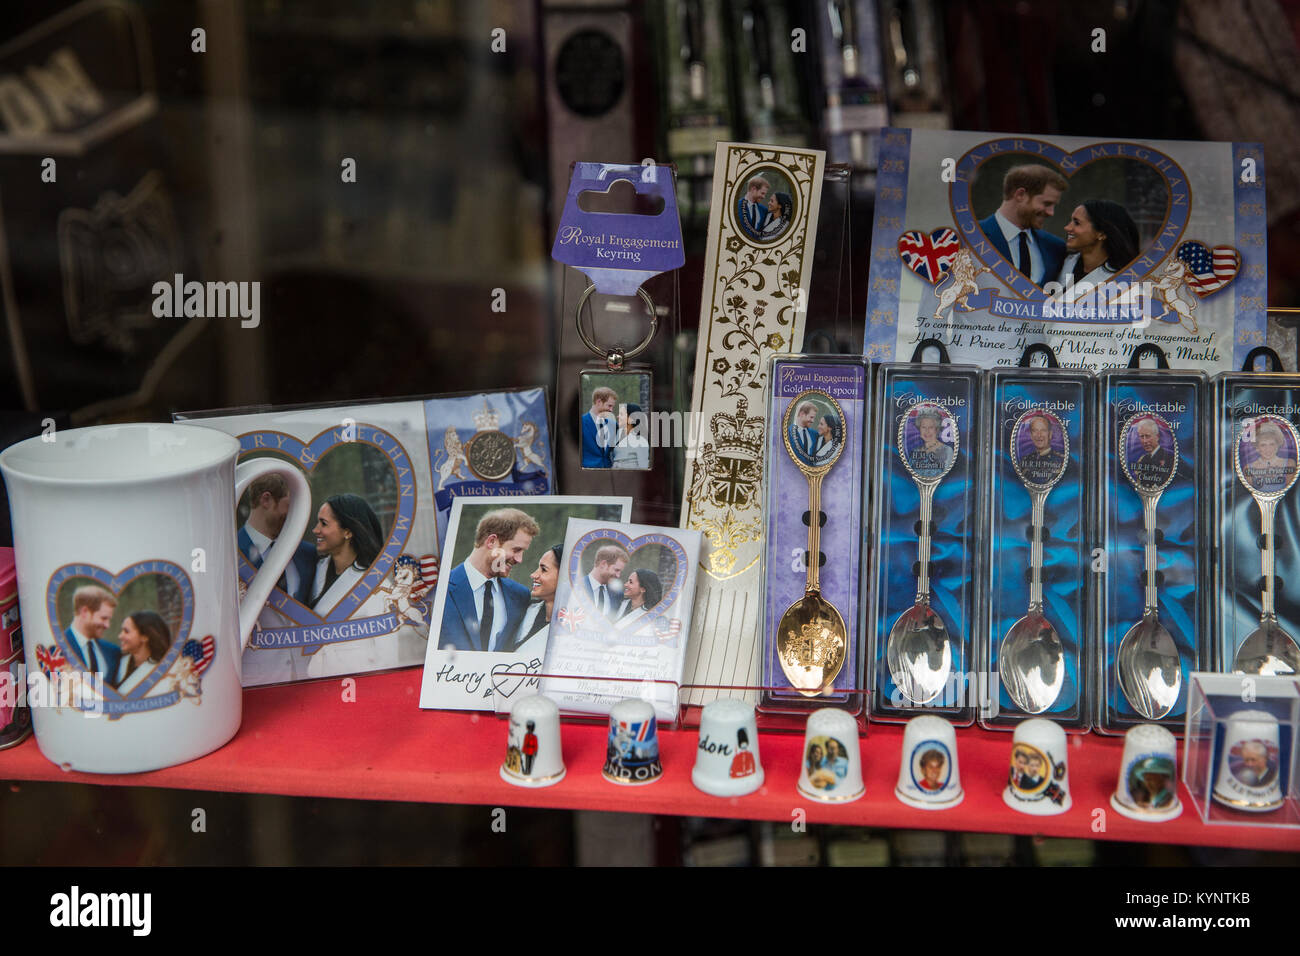 Windsor, UK. 15th Jan, 2018. Mugs, spoons and other mementos featuring images of Prince Harry and Meghan Markle have begun to appear in souvenir and gift shops around Windsor ahead of the royal wedding at St George's Chapel, Windsor Castle, in May. Credit: Mark Kerrison/Alamy Live News Stock Photo